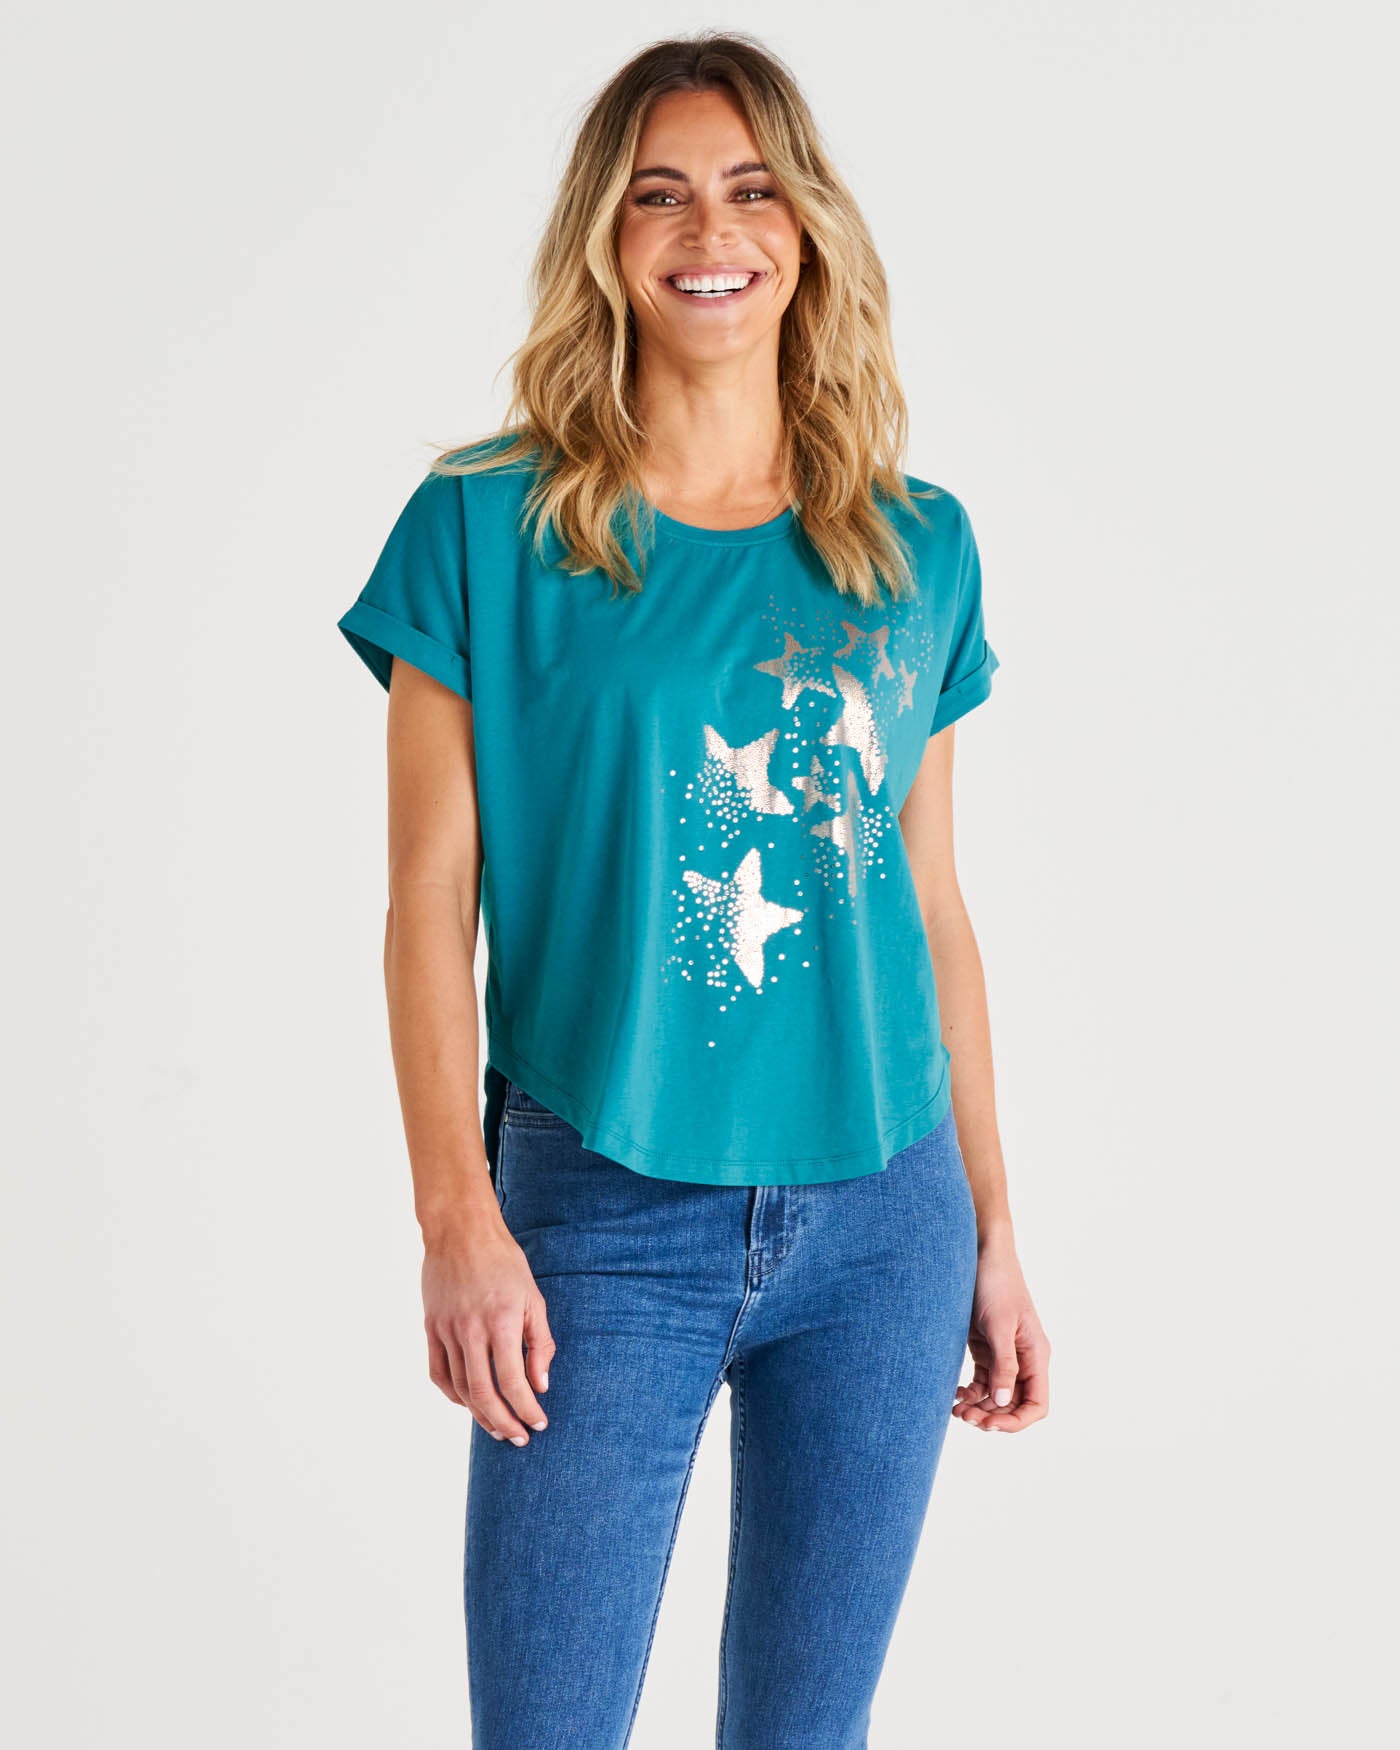 Bondi Relaxed Fit Cotton Printed Tee - Forest Print Turquoise